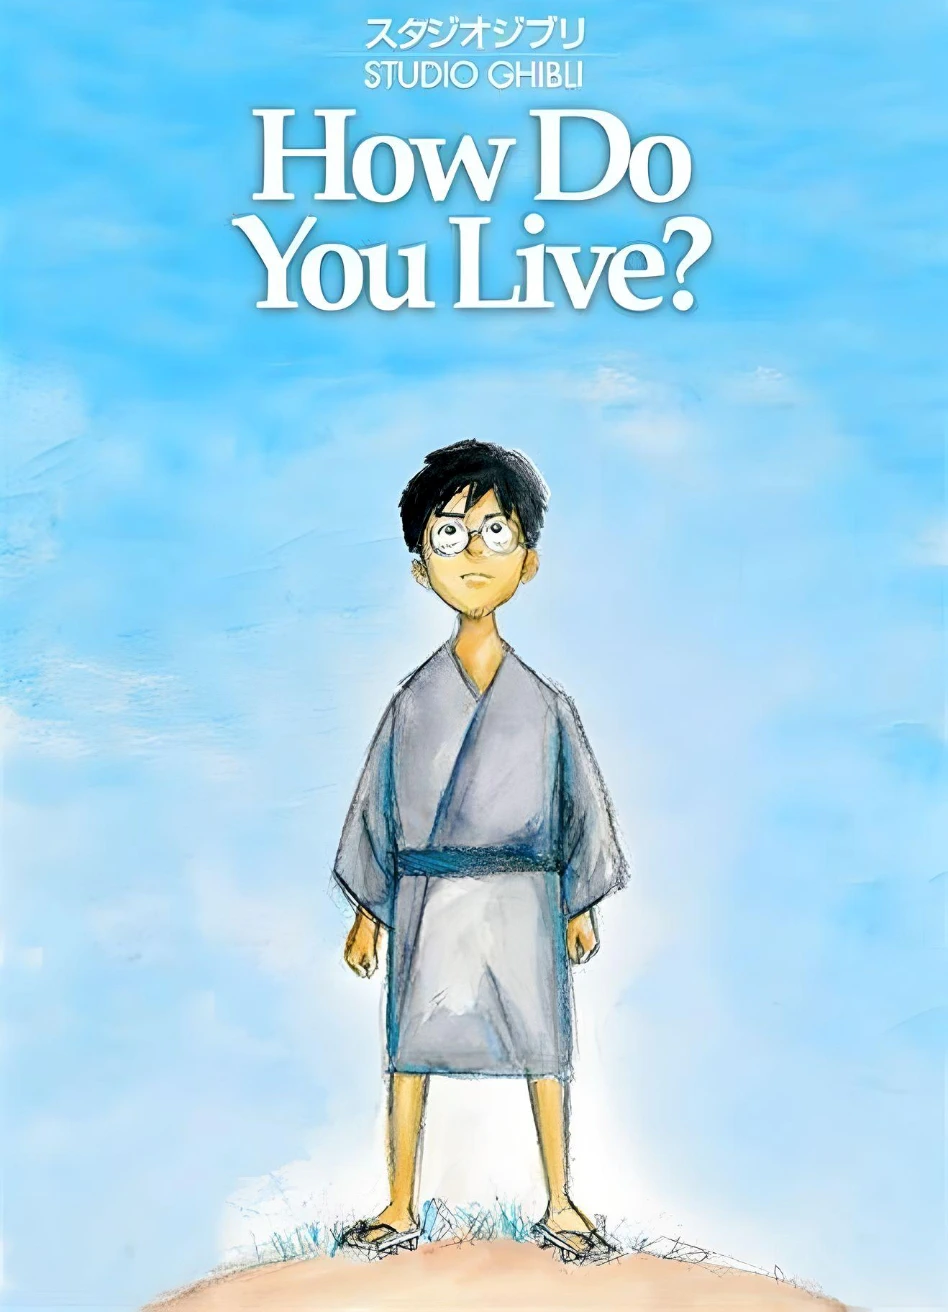 Studio Ghibli Sets New Miyazaki Hayao Film, ‘How Do You Live,’ for December 8, 2023 in US Theaters - See Trailer